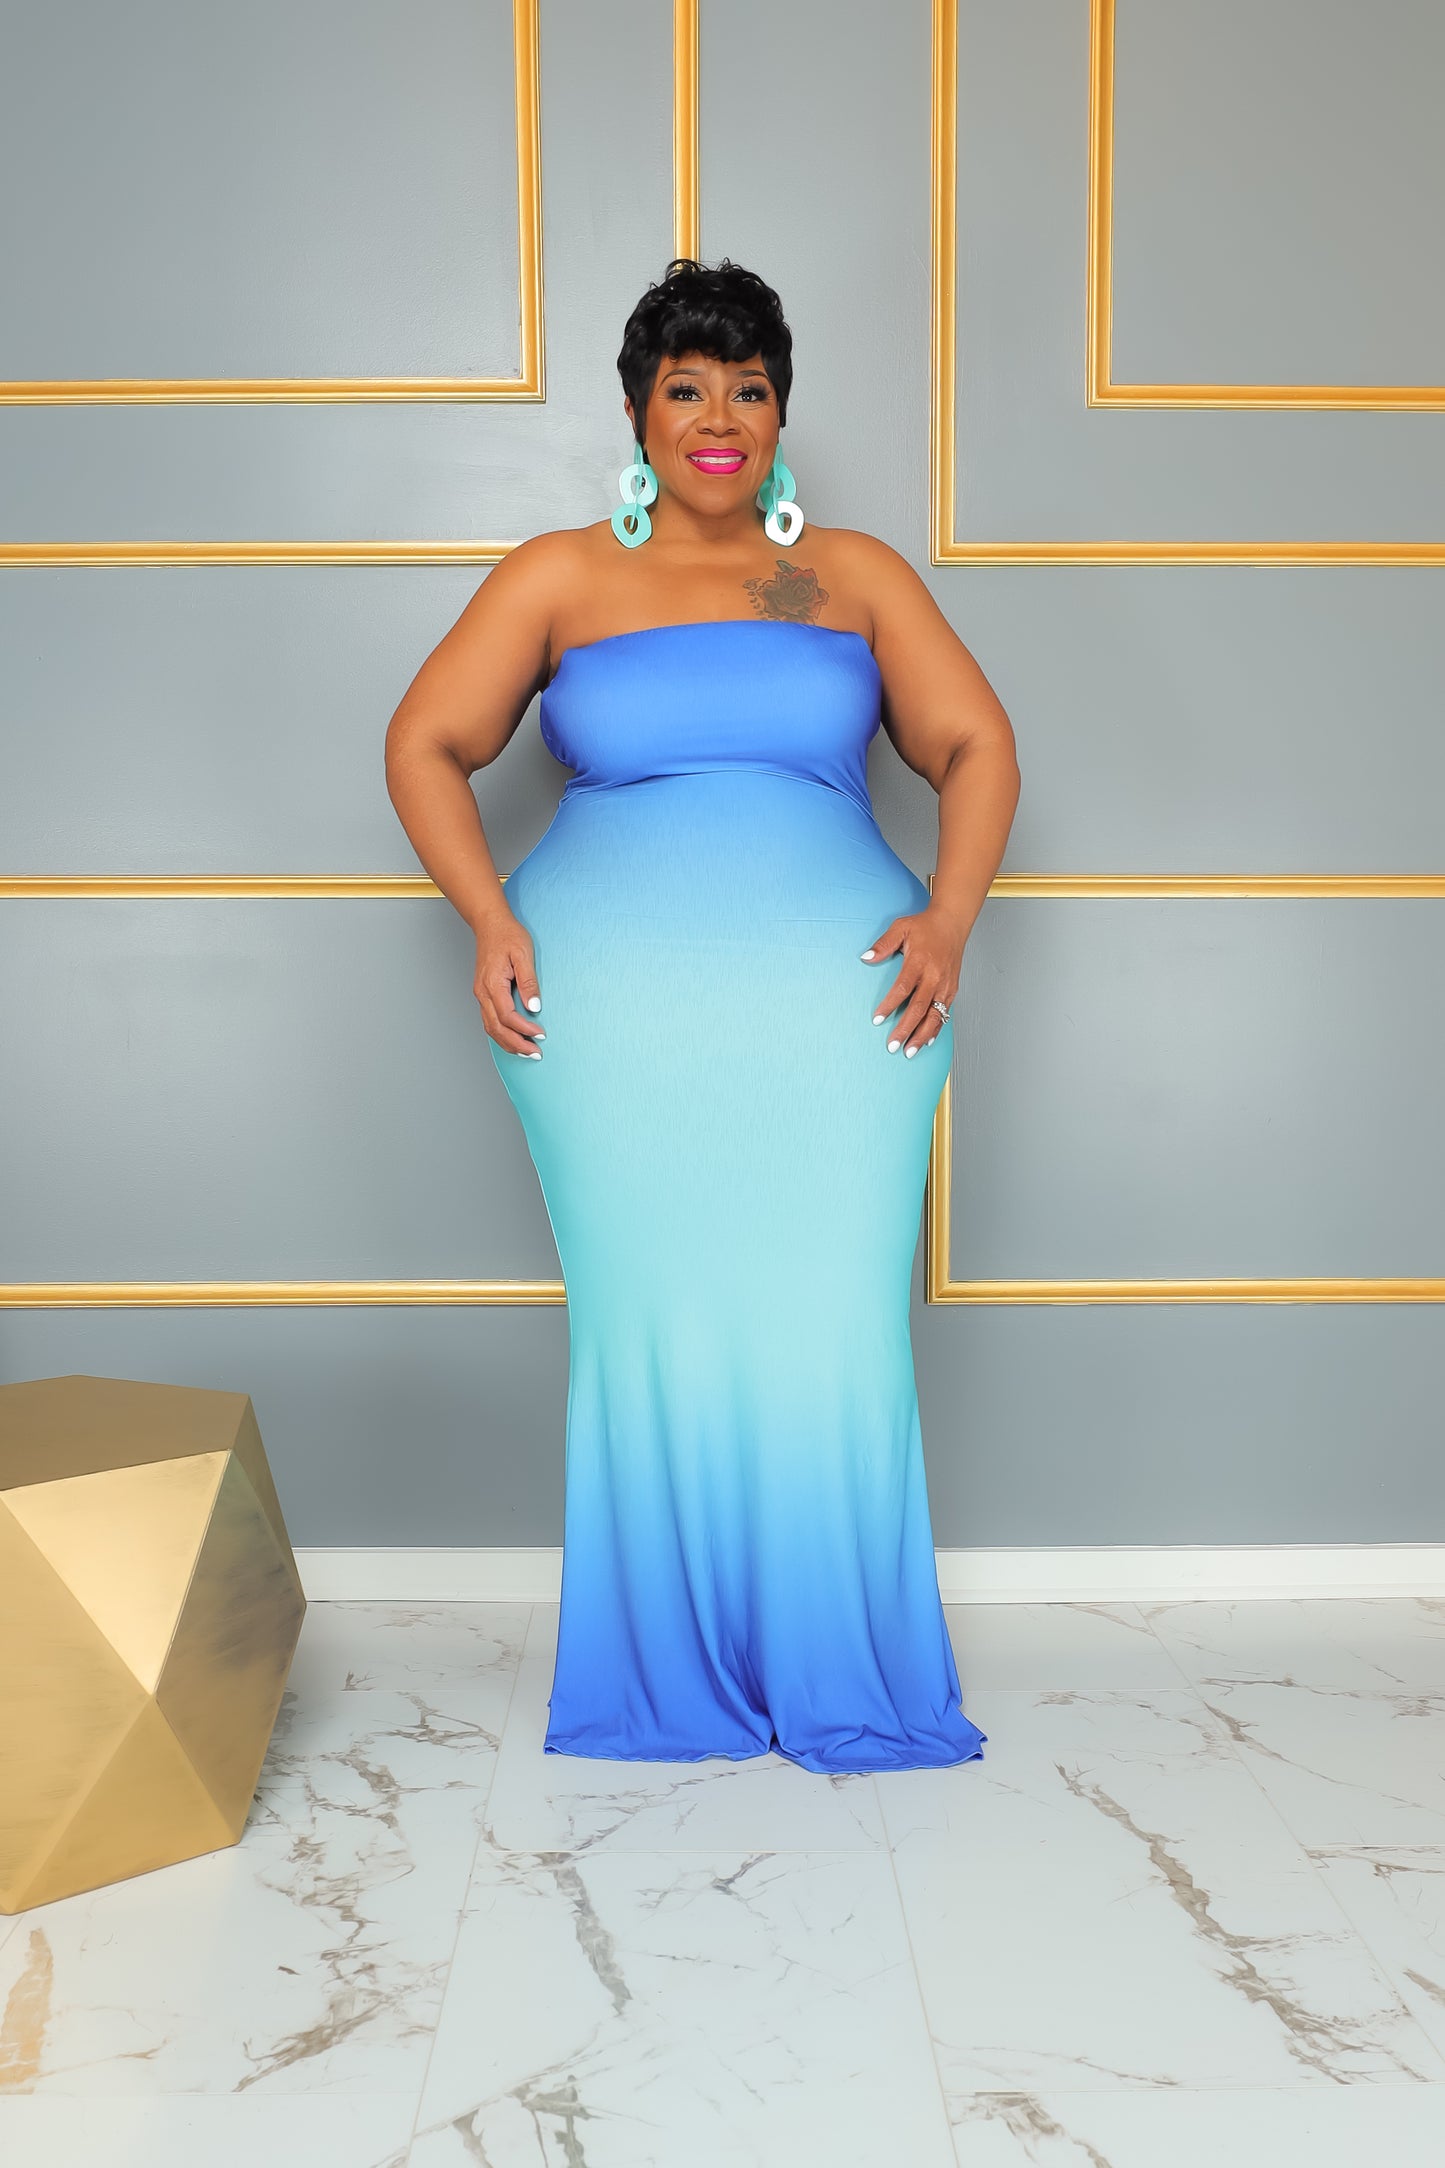 Load image into Gallery viewer, Blue Ombre Tube Dress
